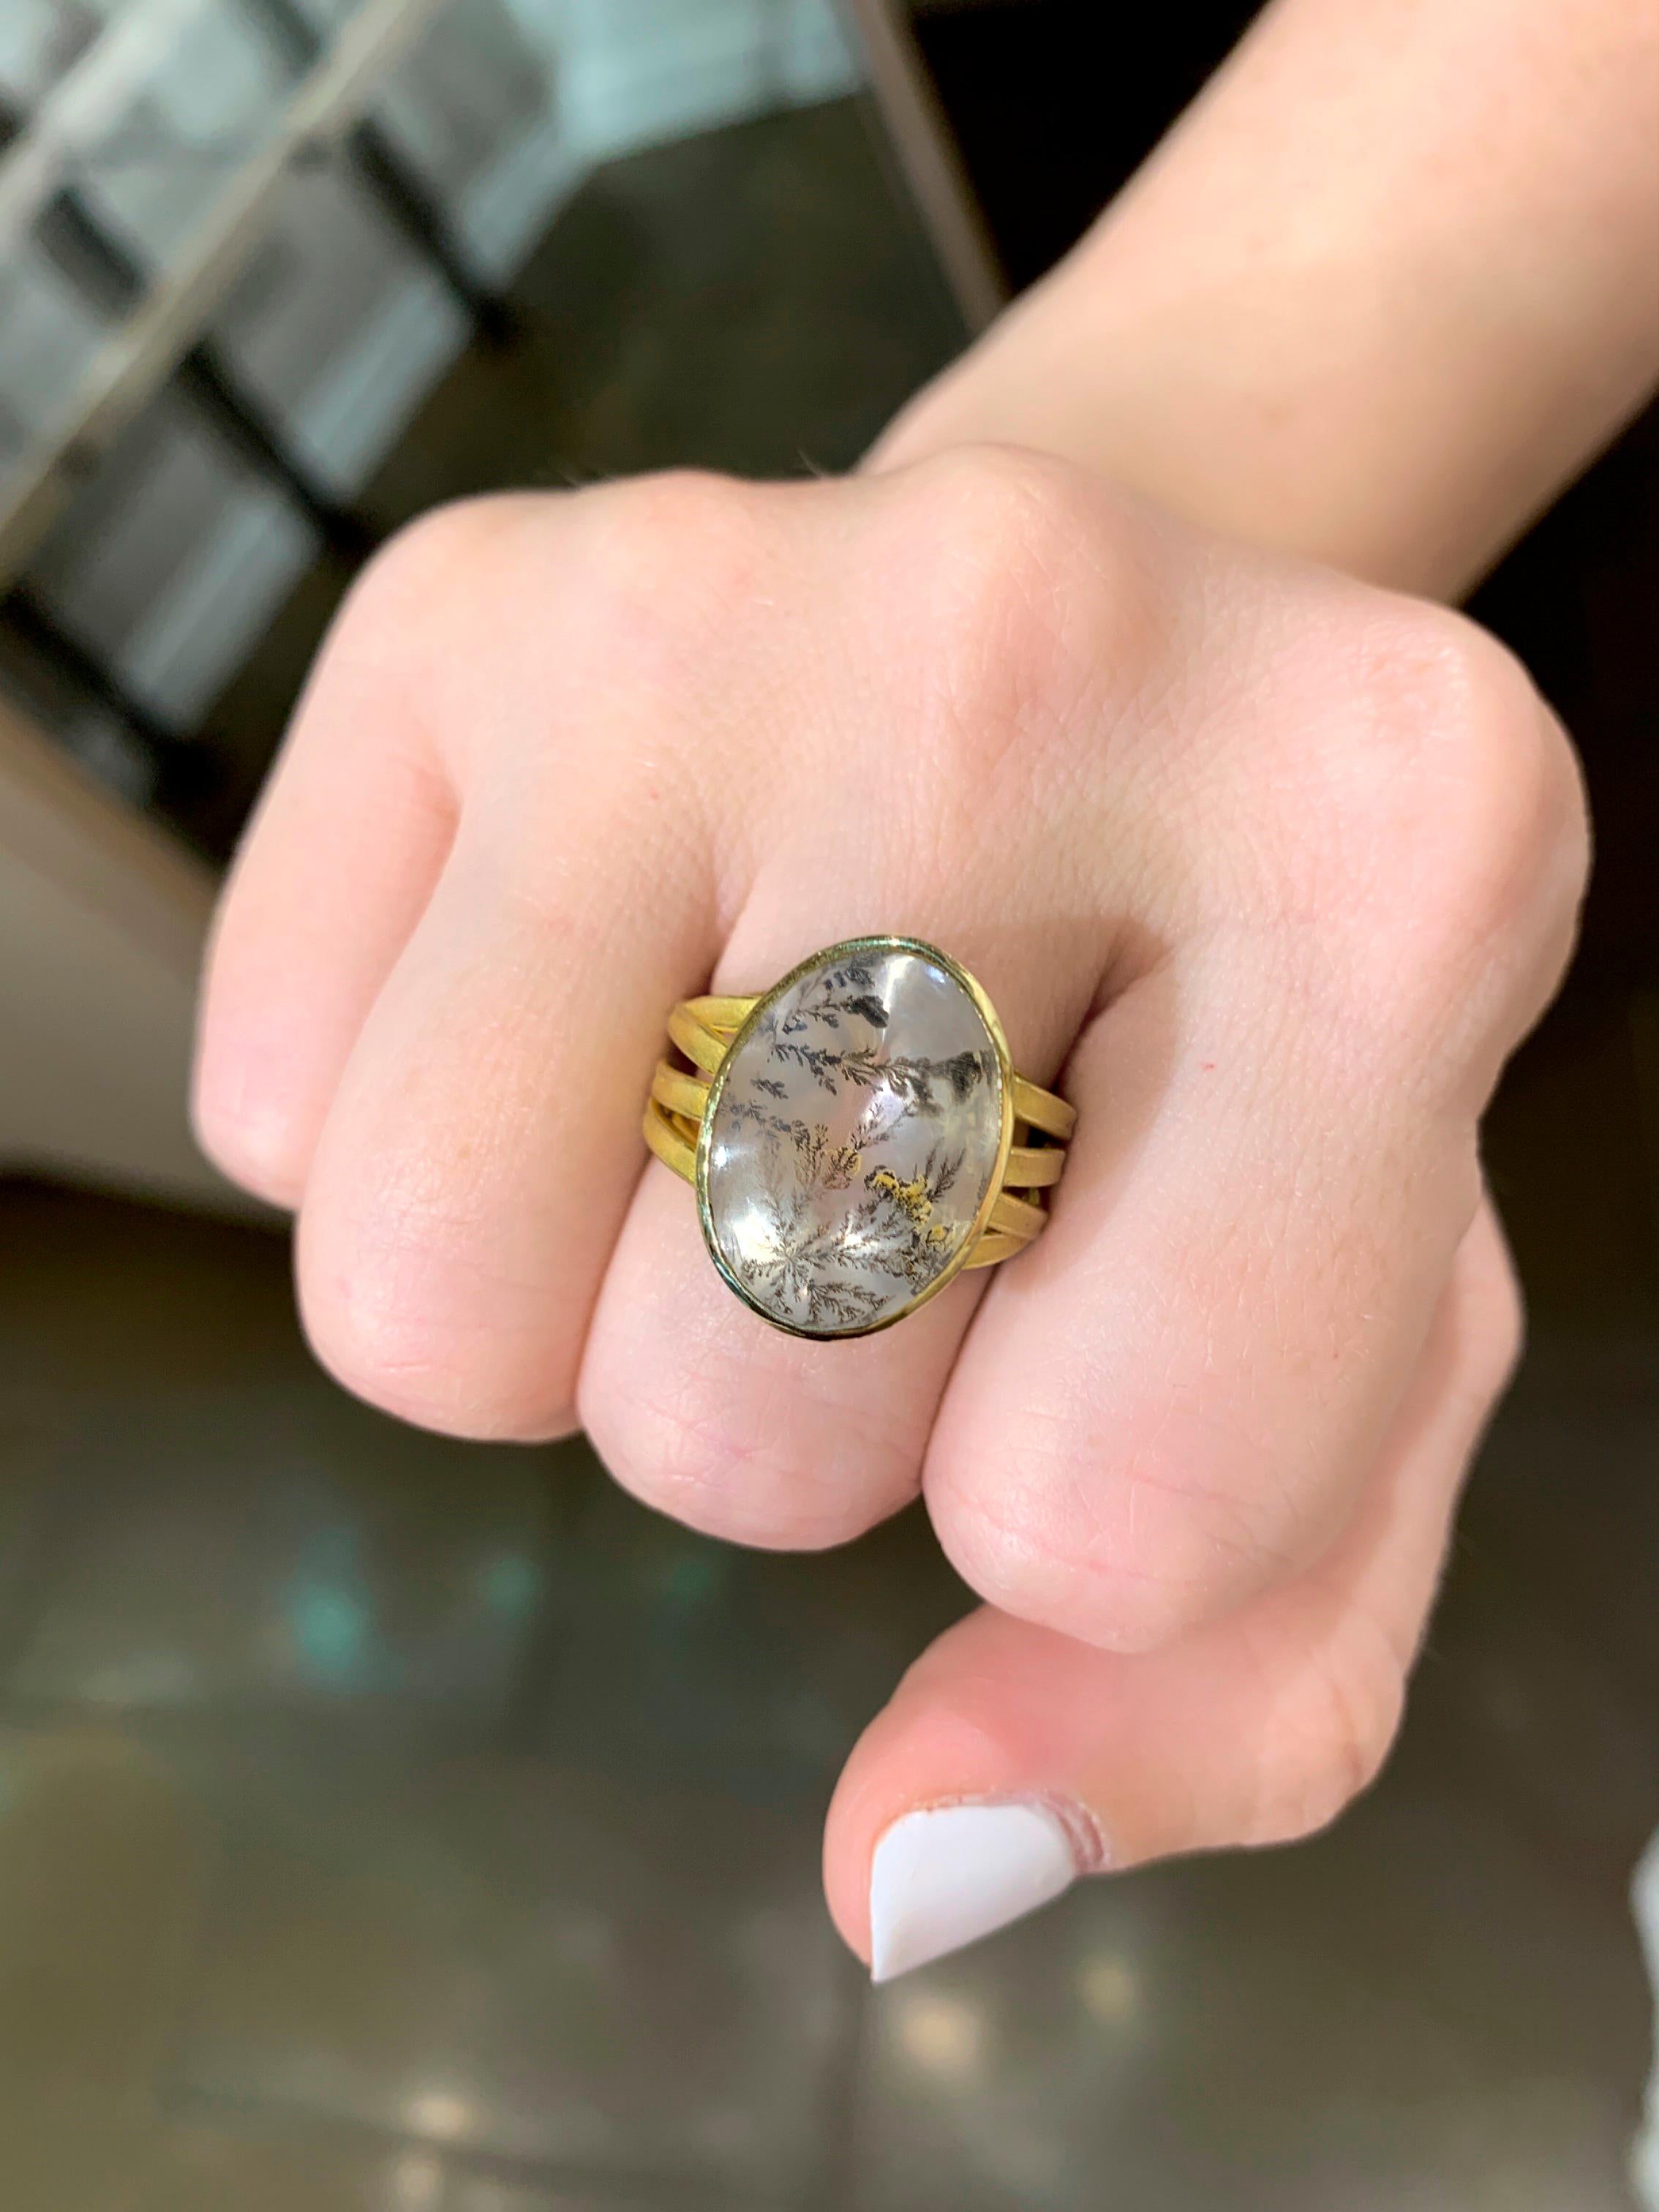 One of a Kind Ribbon Wrap Ring hand-fabricated by award-winning jewelry maker Barbara Heinrich showcasing Mother Nature's magnificence, a completely natural 10.08 carat oval dendrite agate bezel-set atop the makers signature-finished 18k yellow gold